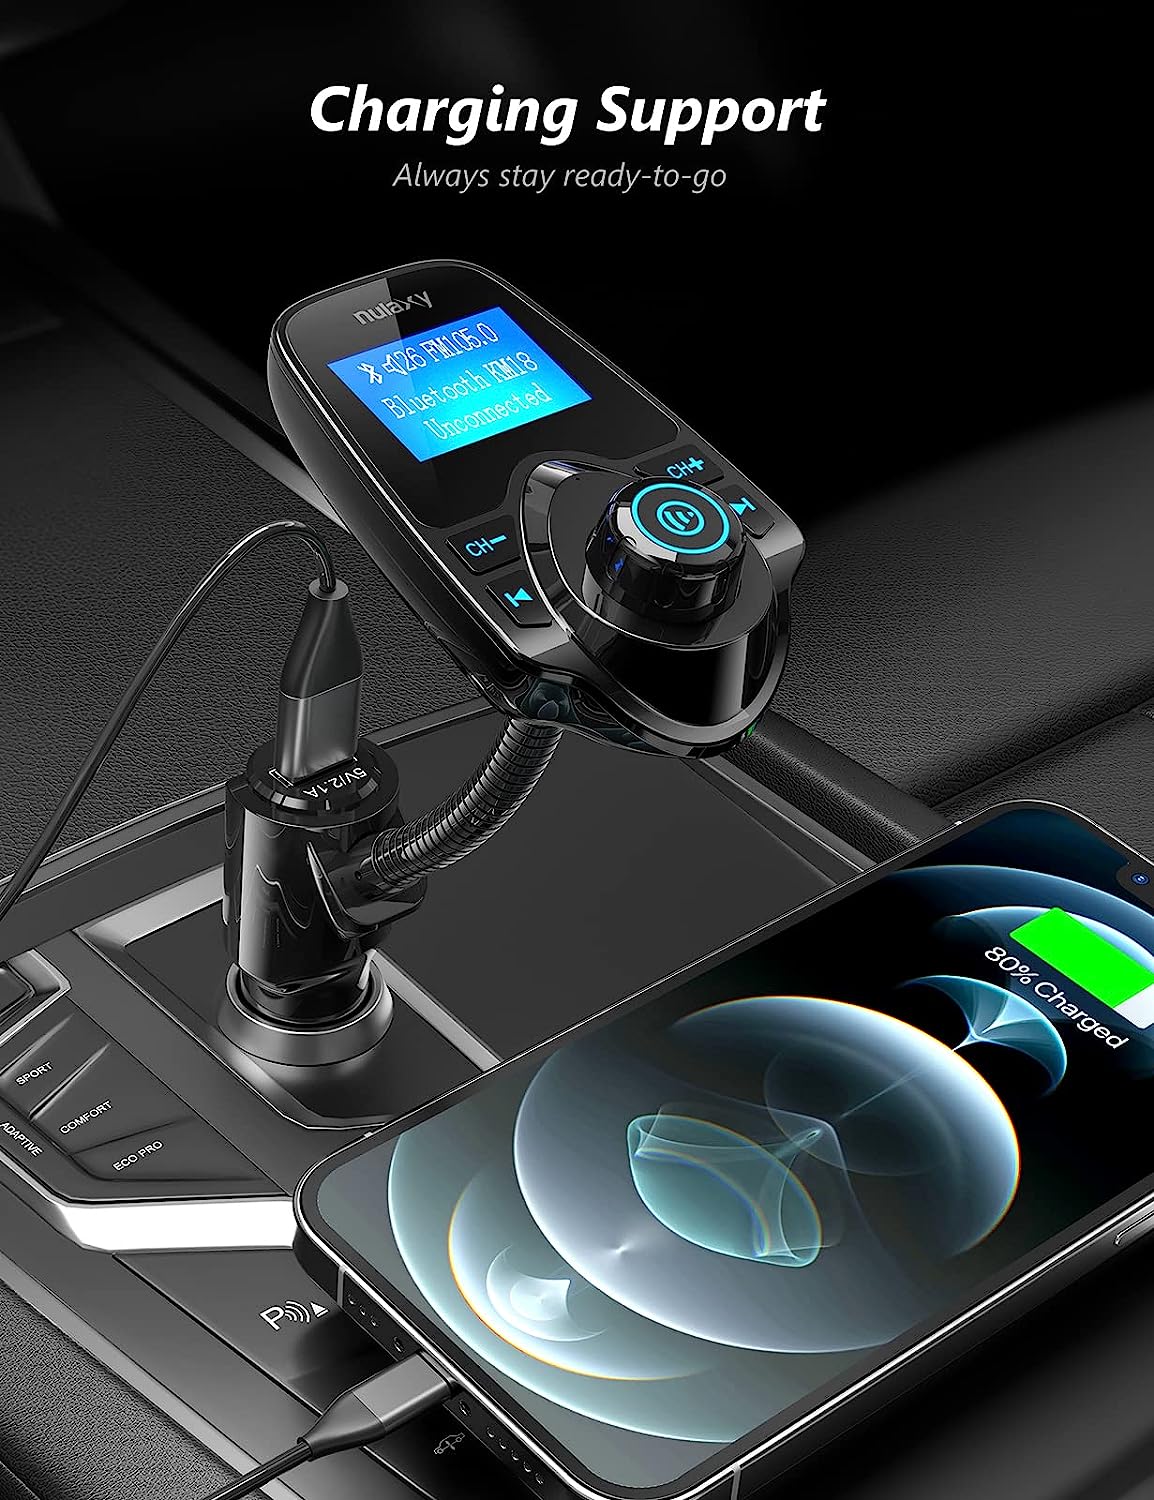 EYUVAA Car FM Transmitter Bluetooth Audio Adapter Wireless Receiver & Car Charger for Mp3 Music Player, Hand Free Call and Phone Charging (Black)